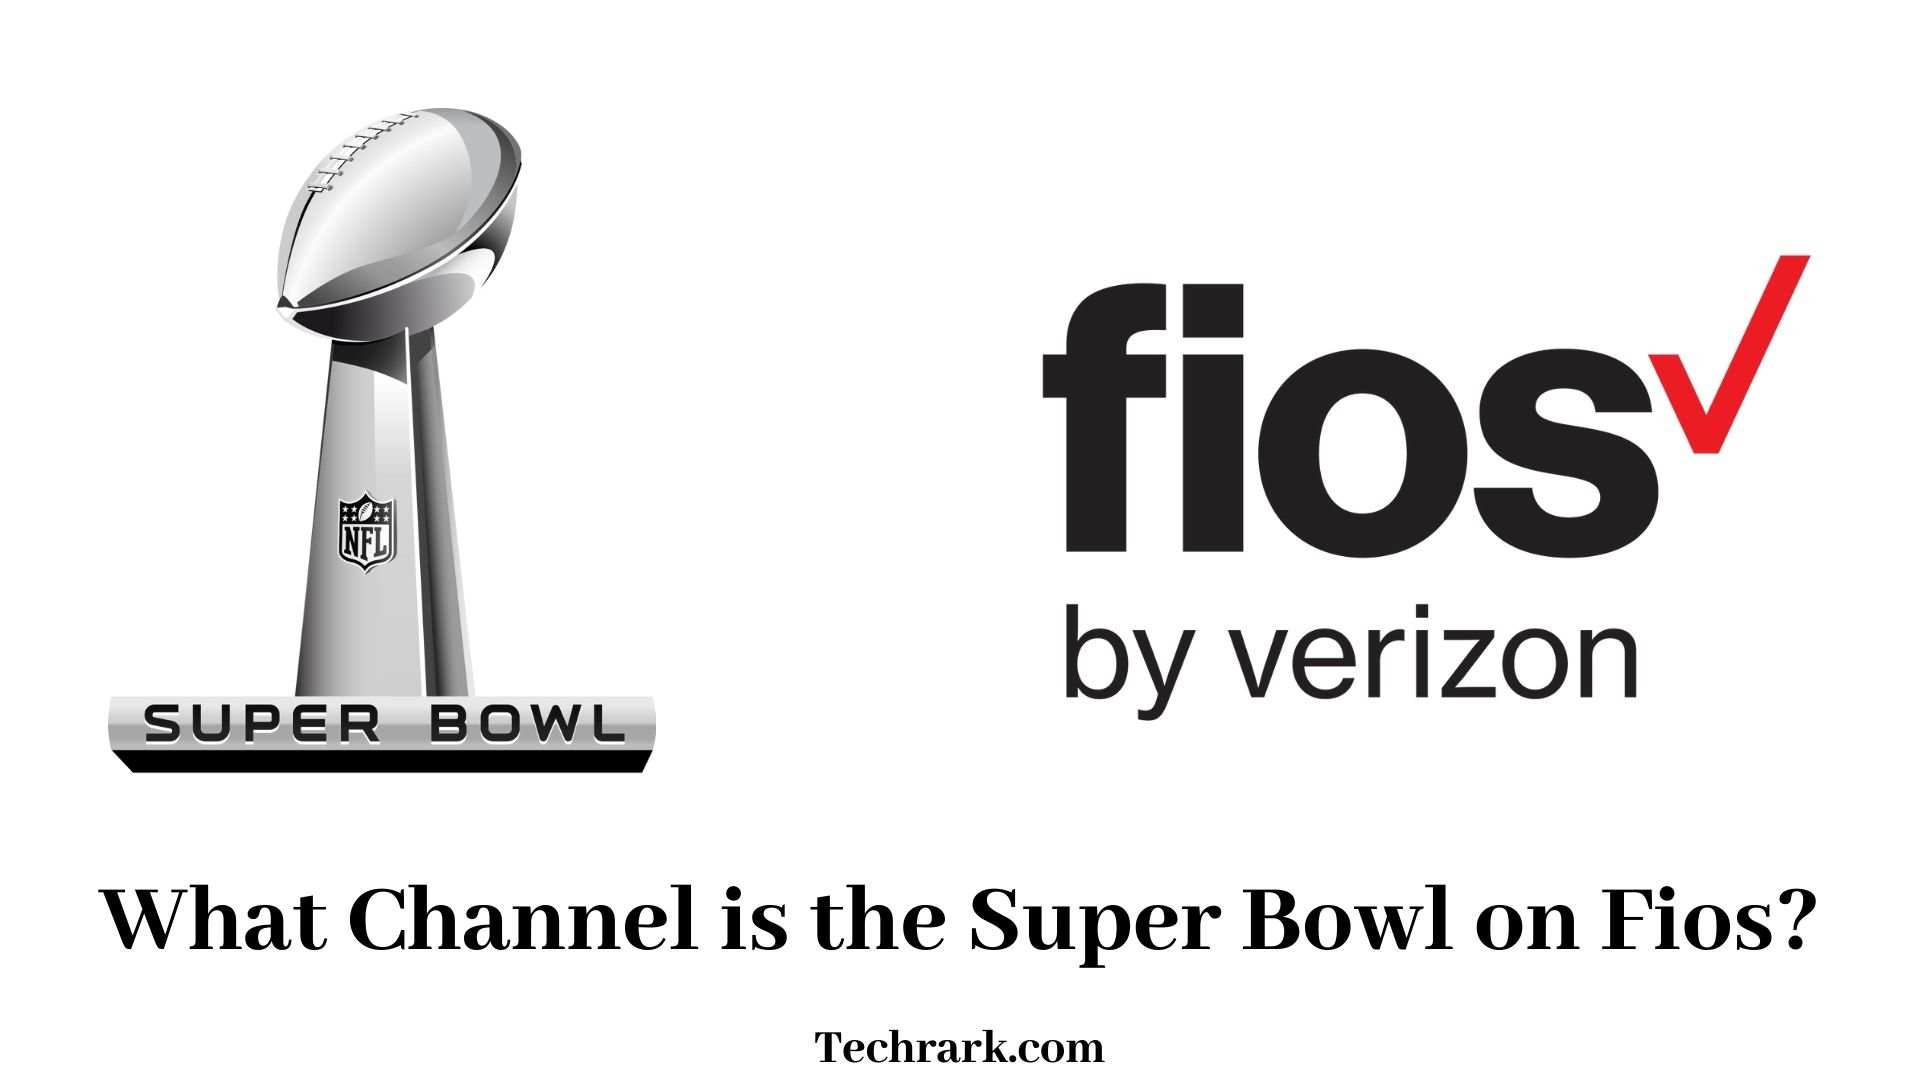 What Channel is the Super Bowl on Fios